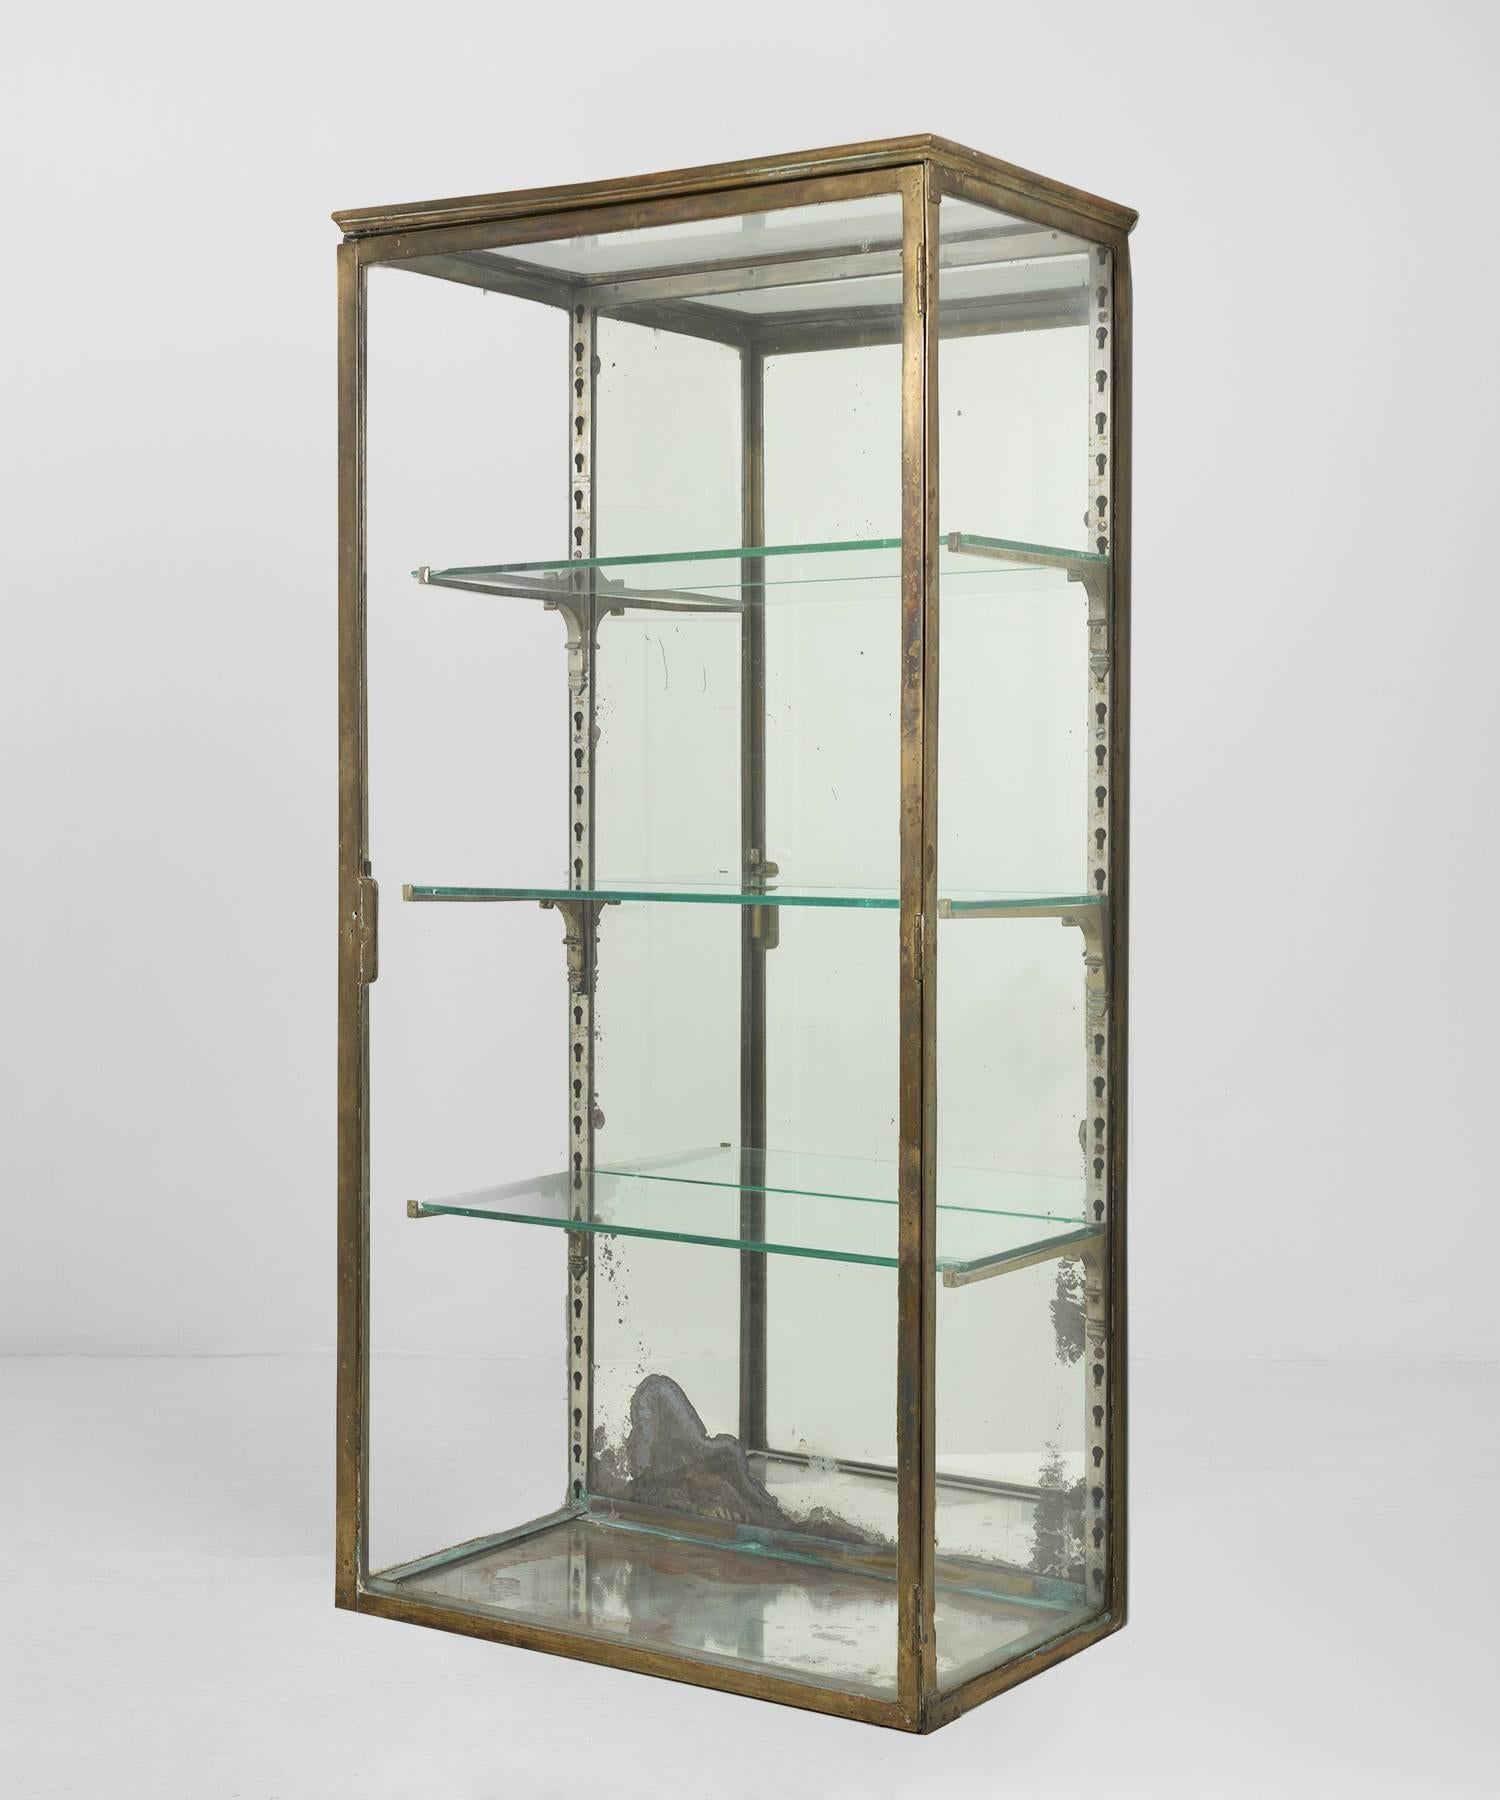 Brass and mercury glass display cabinet, circa 1900.

Elegant wall display cabinet with mirrored back and three glass shelves.